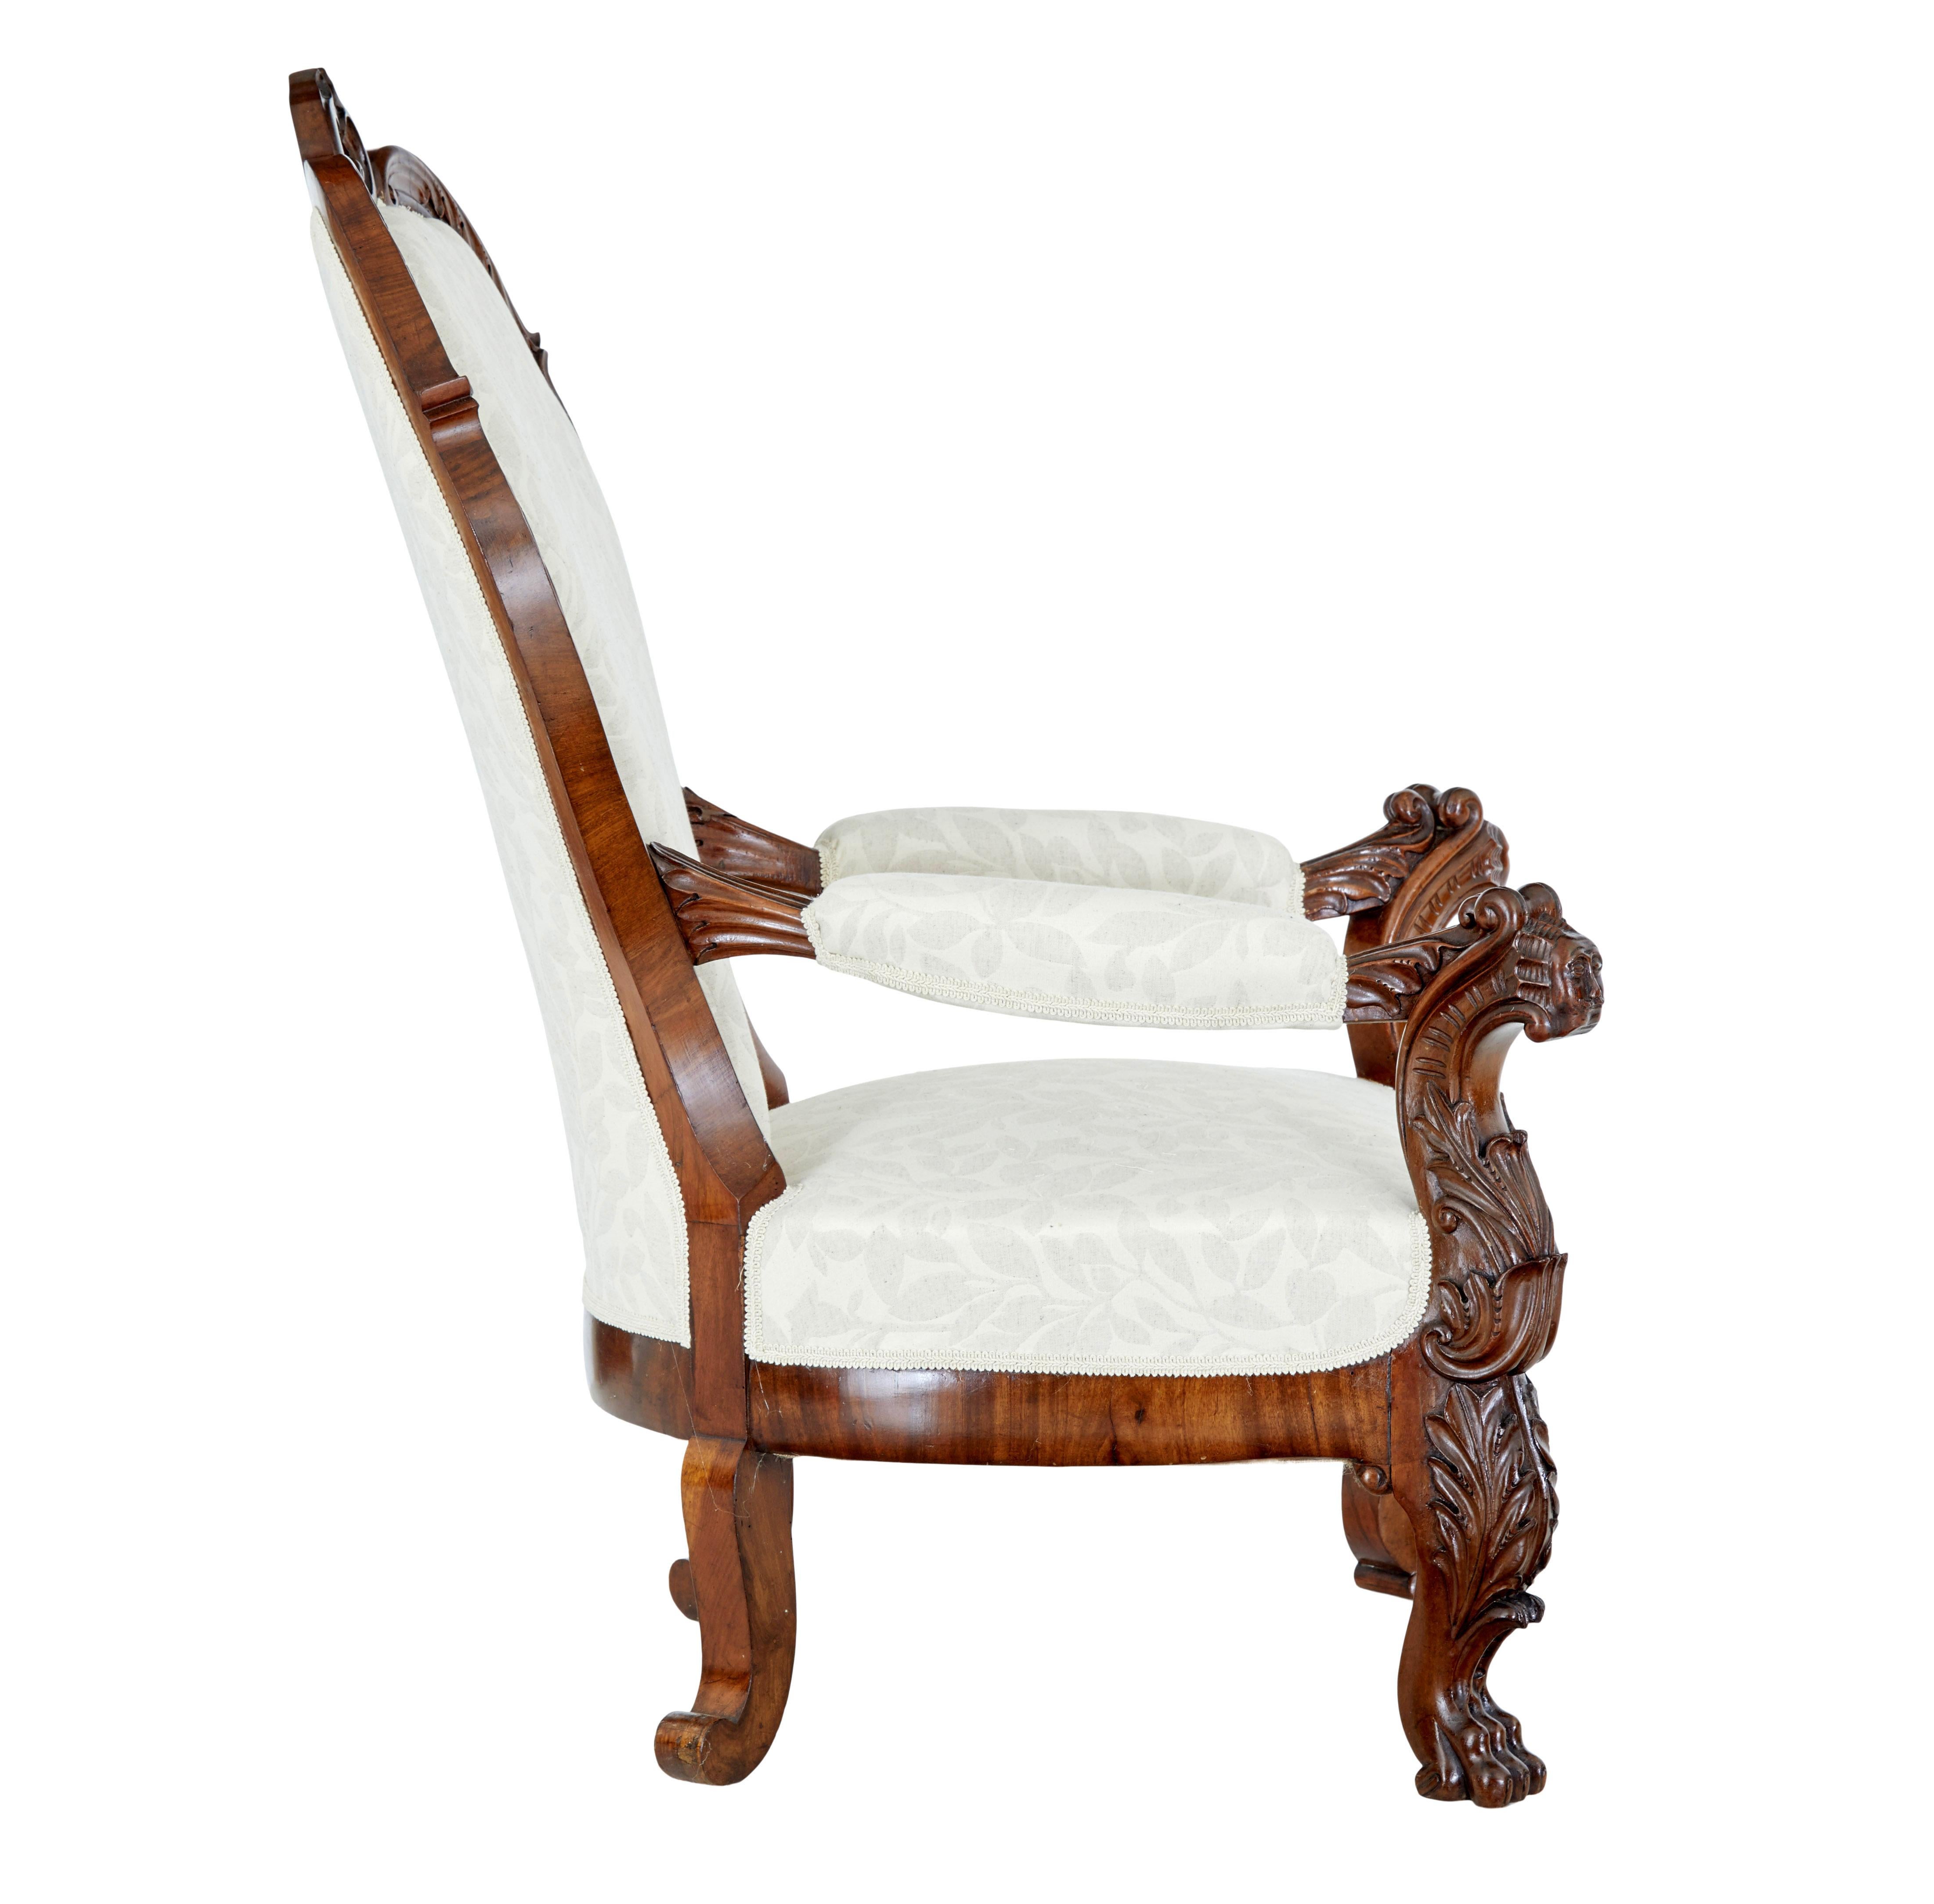 High Victorian Mid 19th century carved walnut armchair For Sale